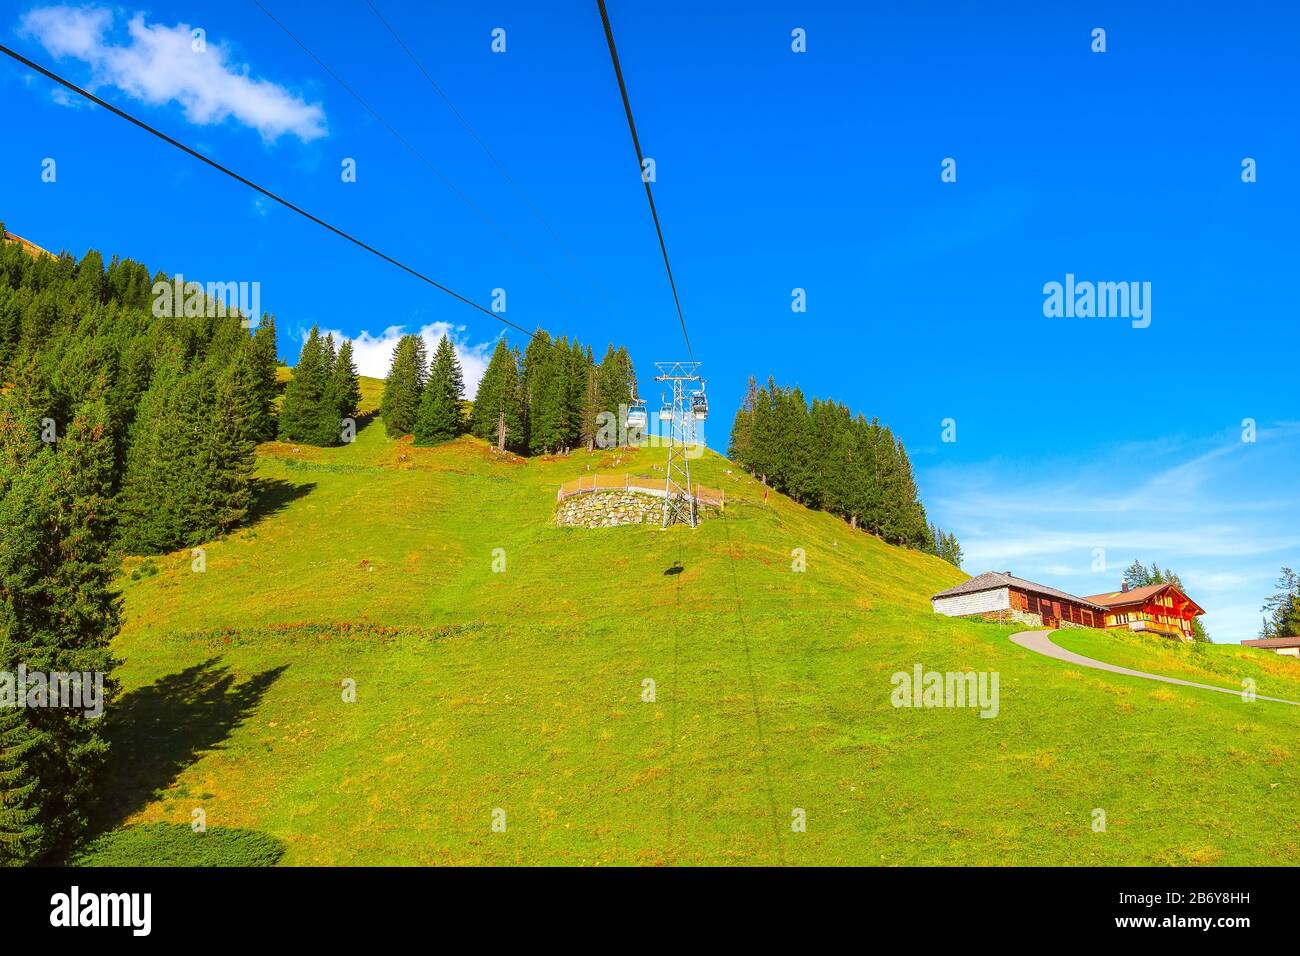 Grindelwald, Switzerland cable car cabins Jungfrau Top of Europe and green Swiss Alps mountains panorama landscape Stock Photo